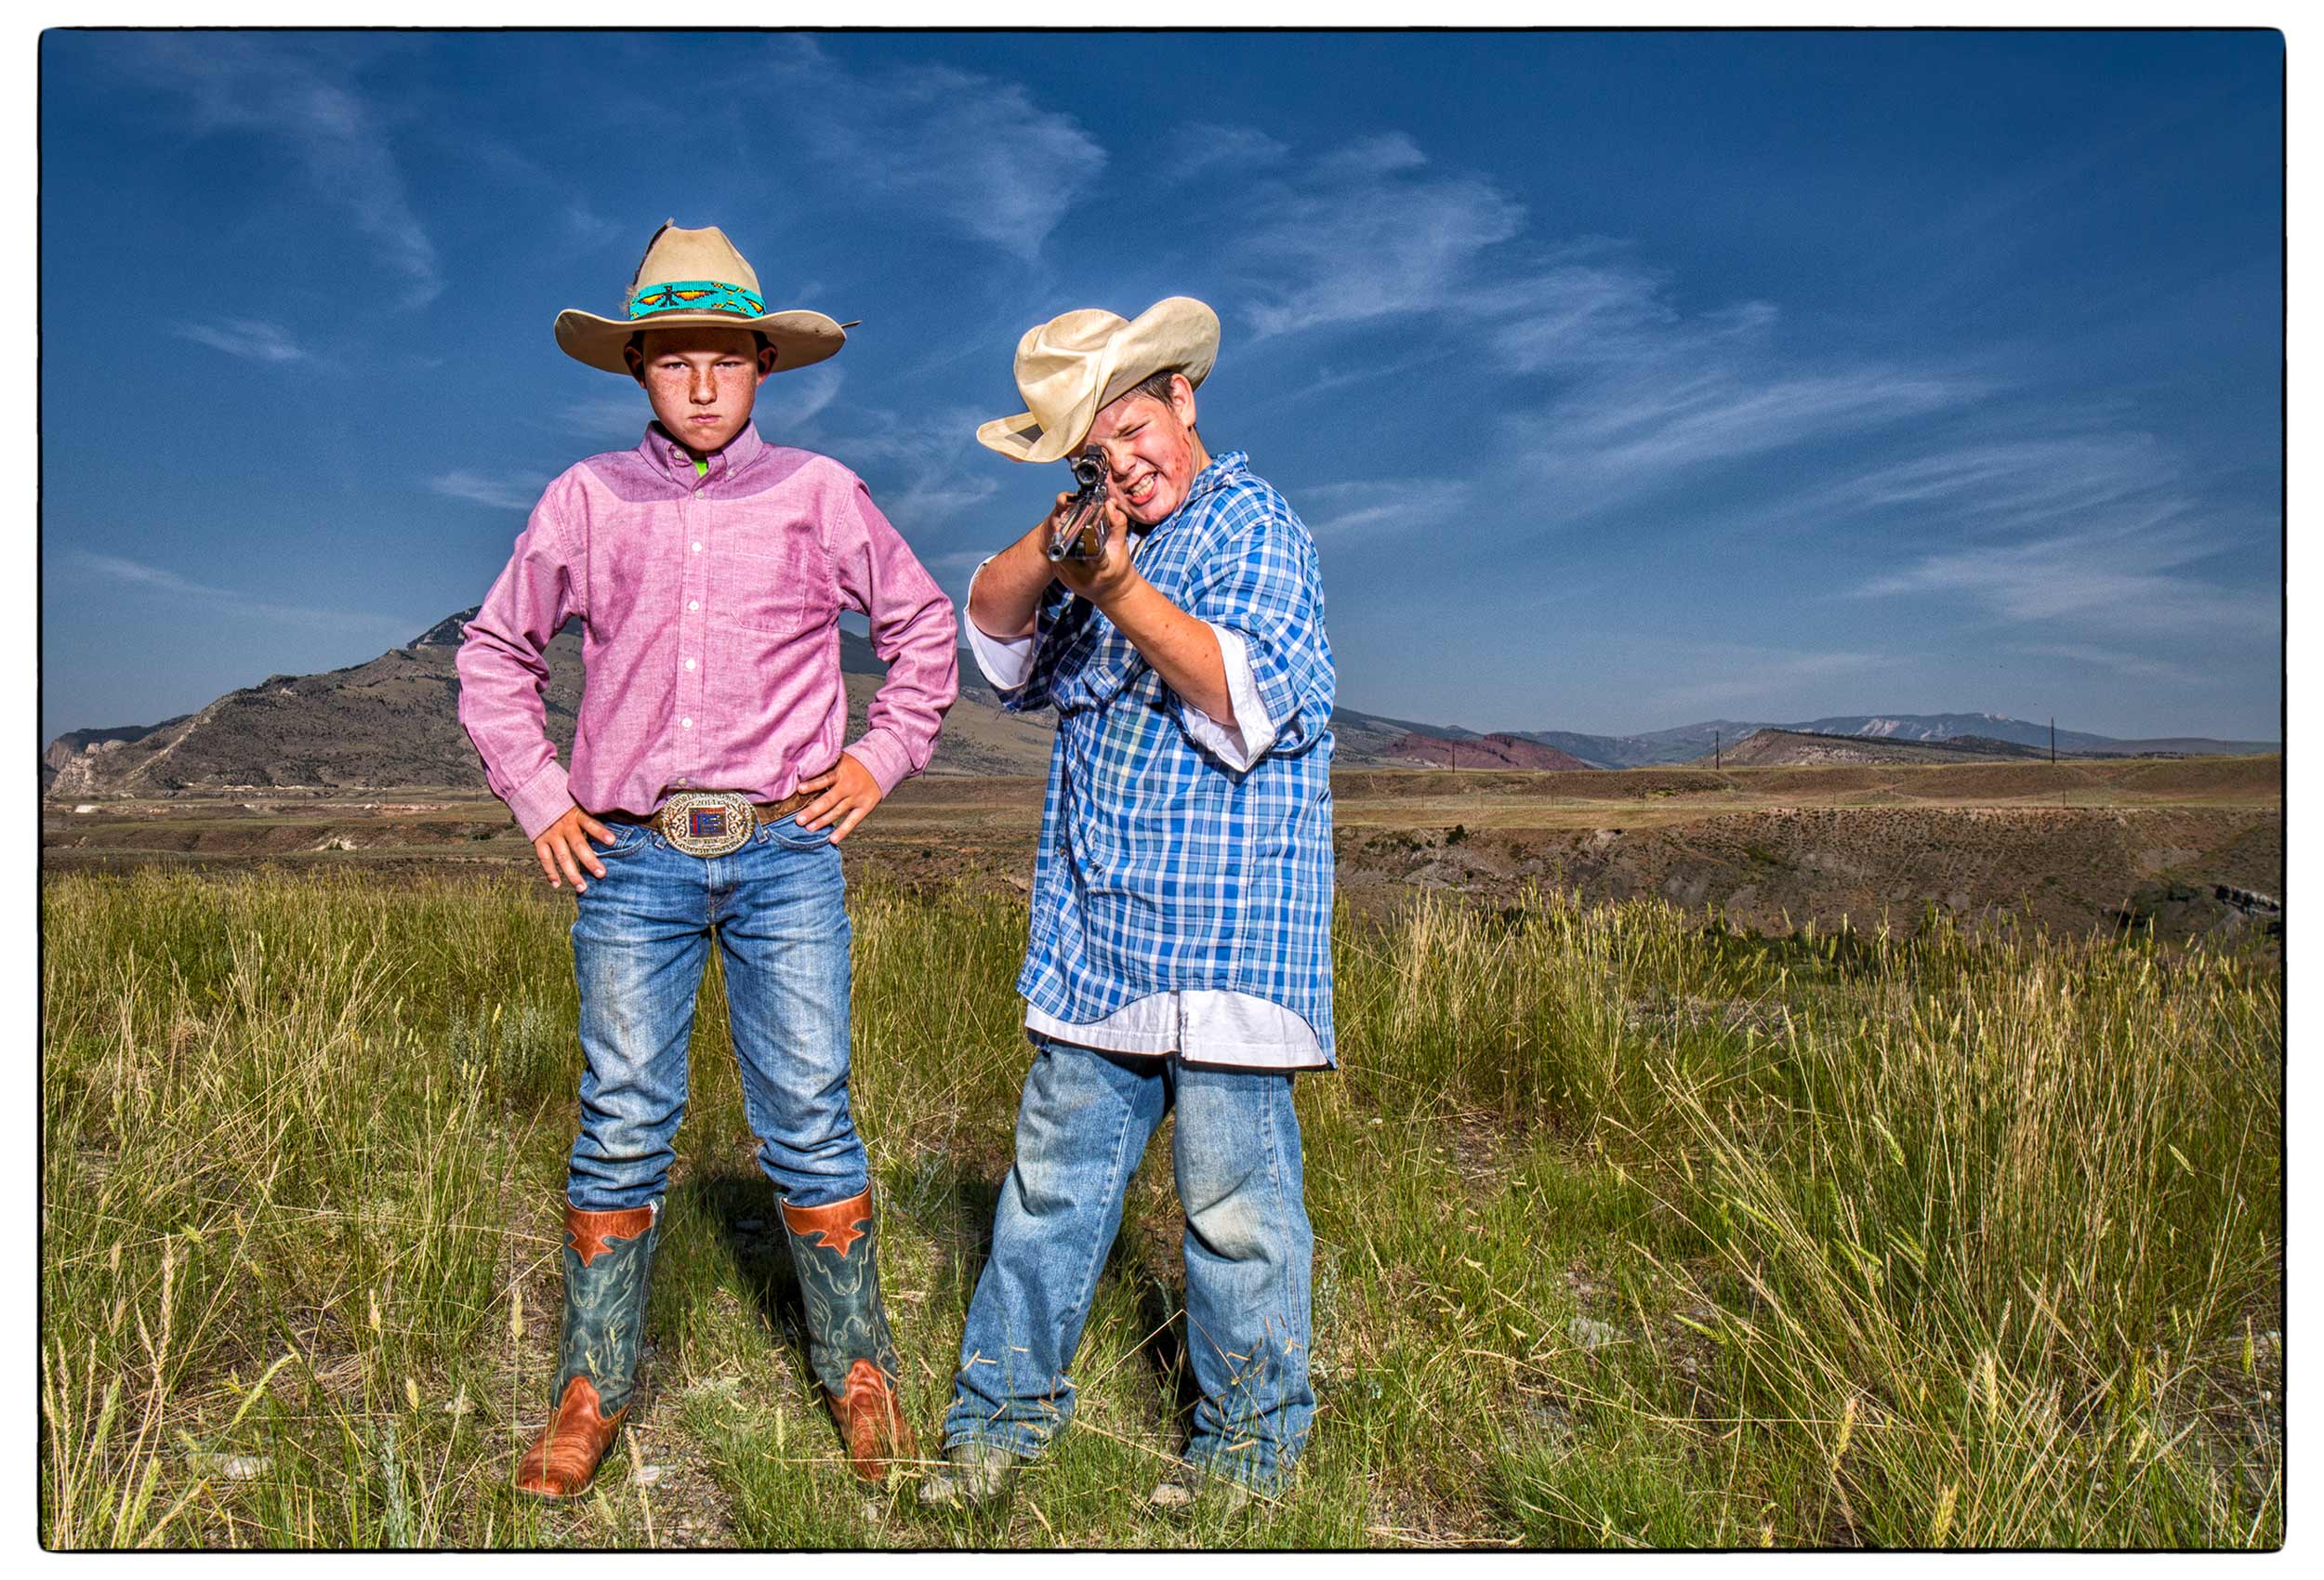 two-boys-one-with-a-rifle-point-it-at-the-photographer-during-a-portrait-in-cody-wyoming